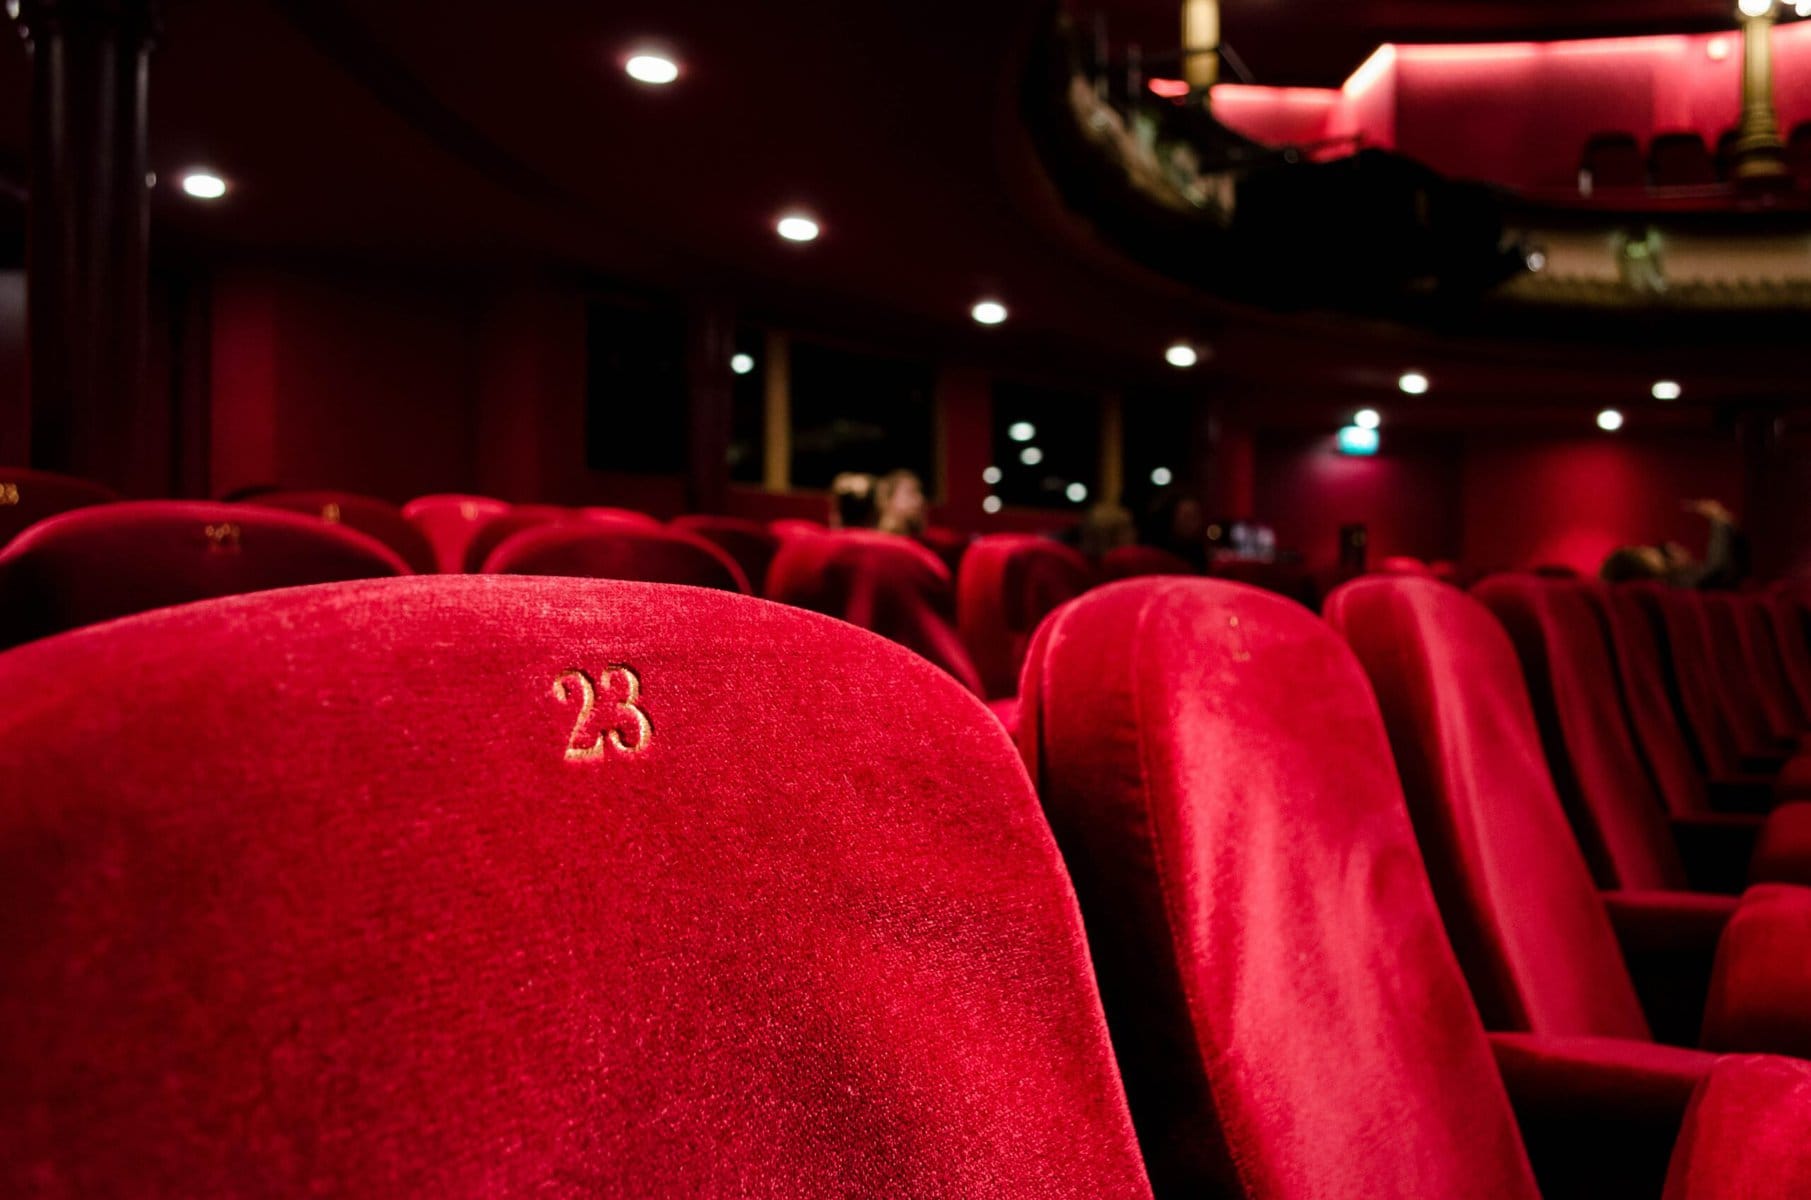 A row of red seats in a Broadway auditorium.